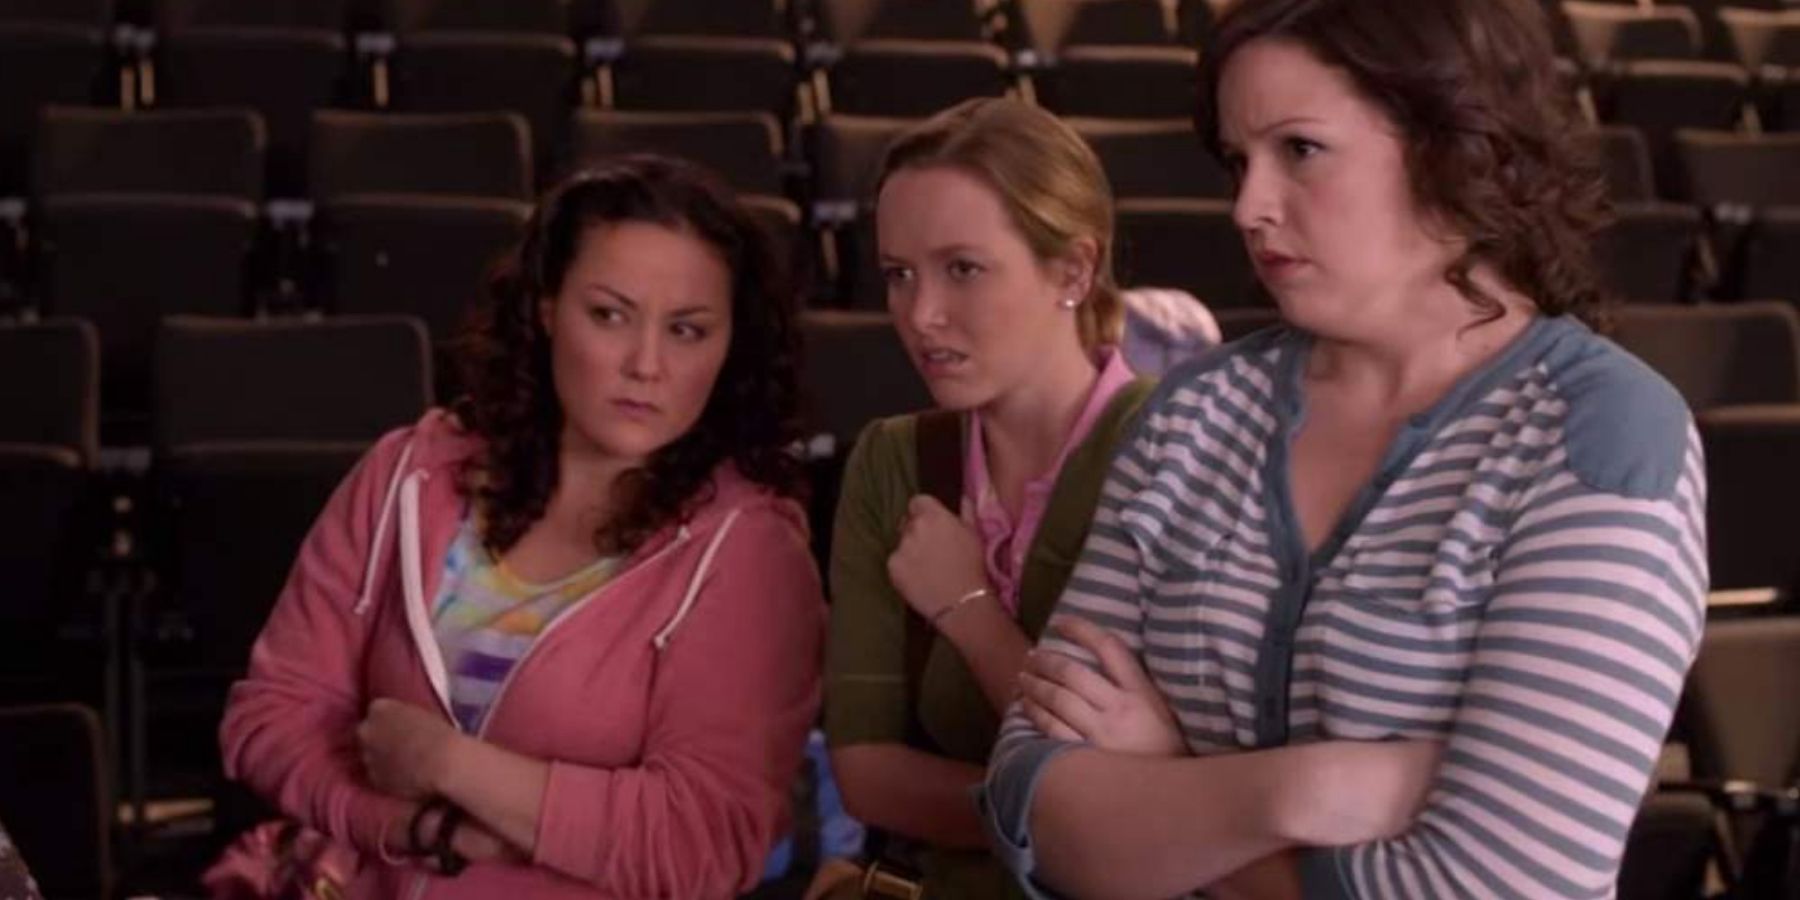 Denise, Jessica, and Ashley in Pitch Perfect in the practice room